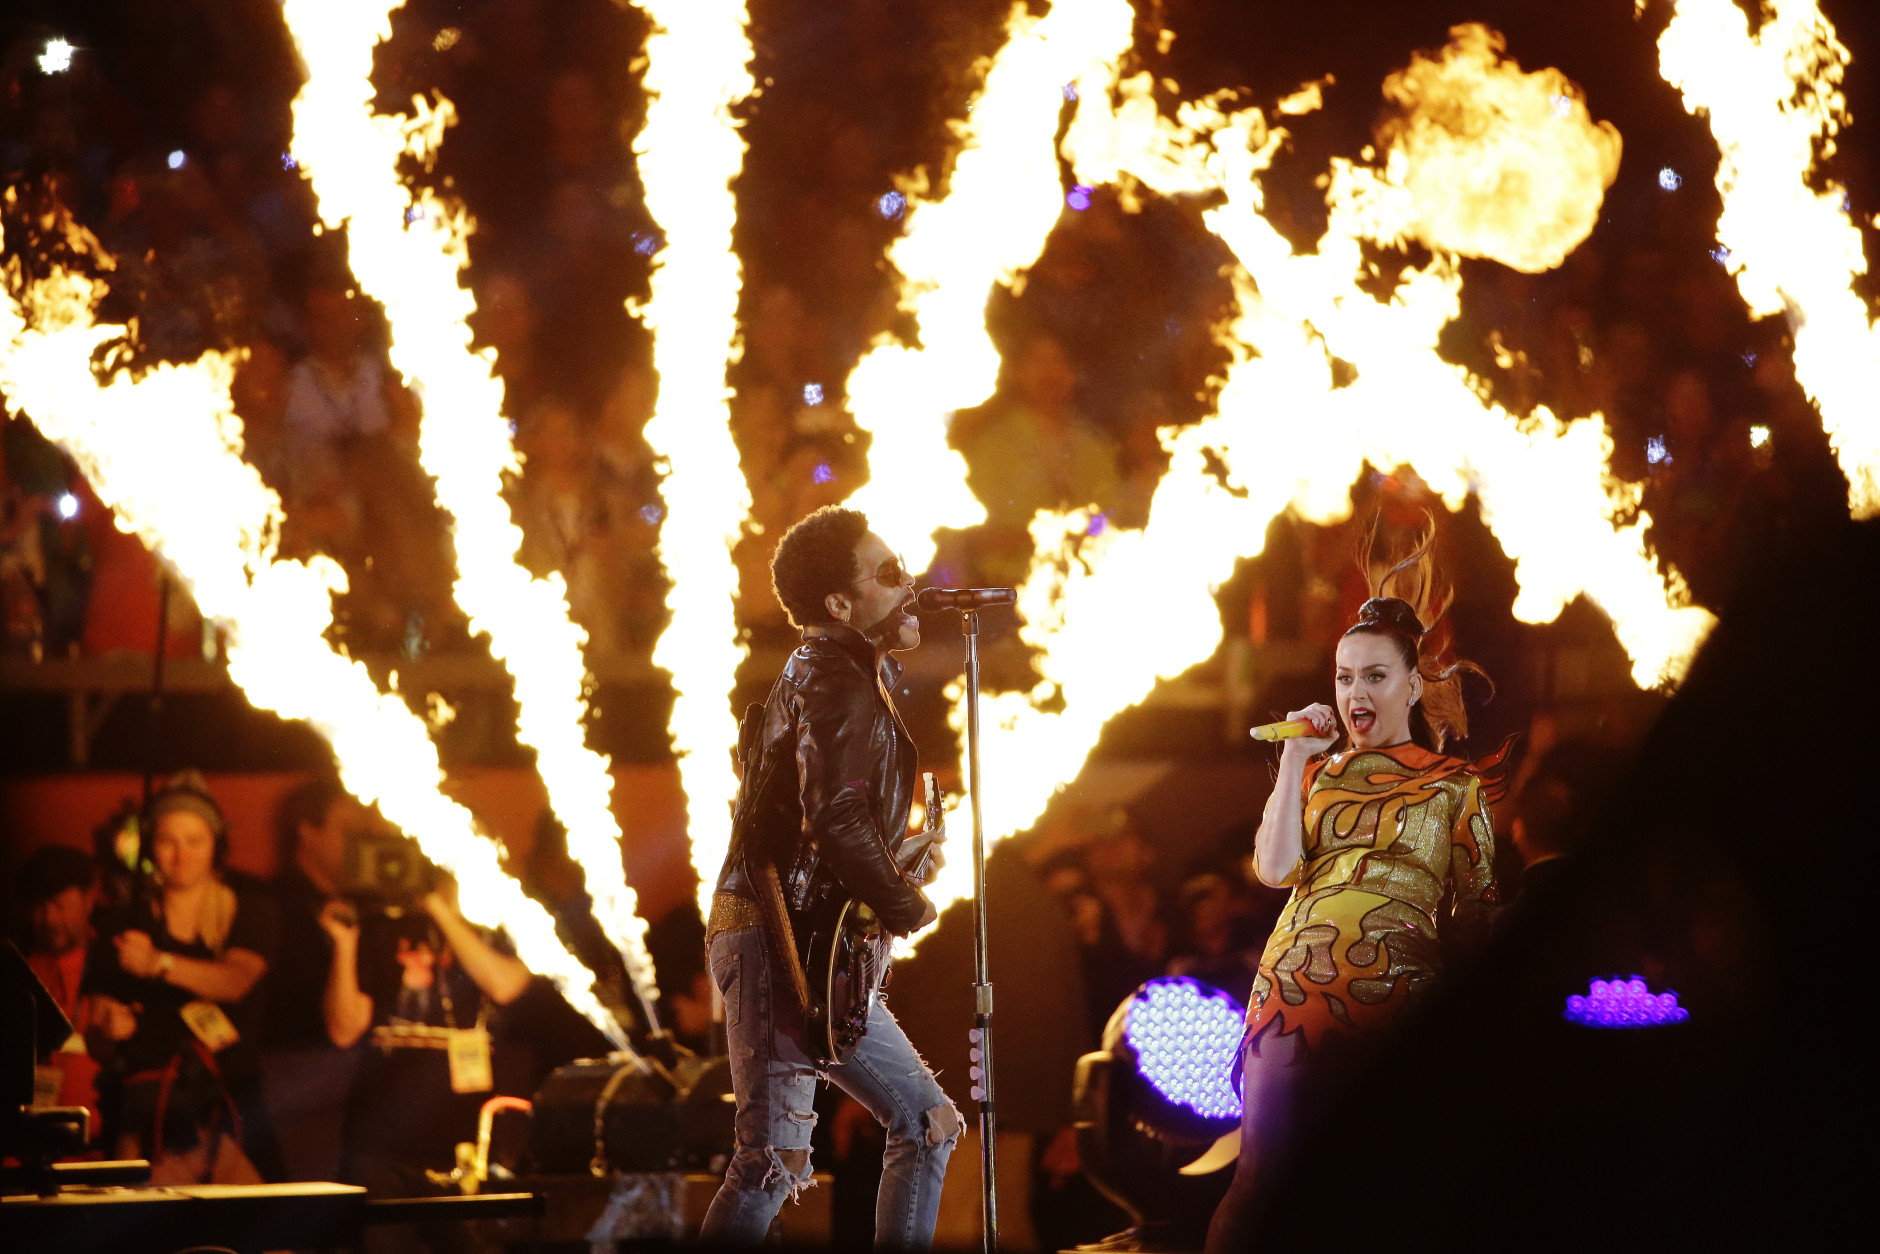 Katy Perry, right, and Lenny Kravitz perform during halftime of the NFL Super Bowl XLIX football game between the Seattle Seahawks and the New England Patriots Sunday, Feb. 1, 2015, in Glendale, Ariz. (AP Photo/Matt Slocum)